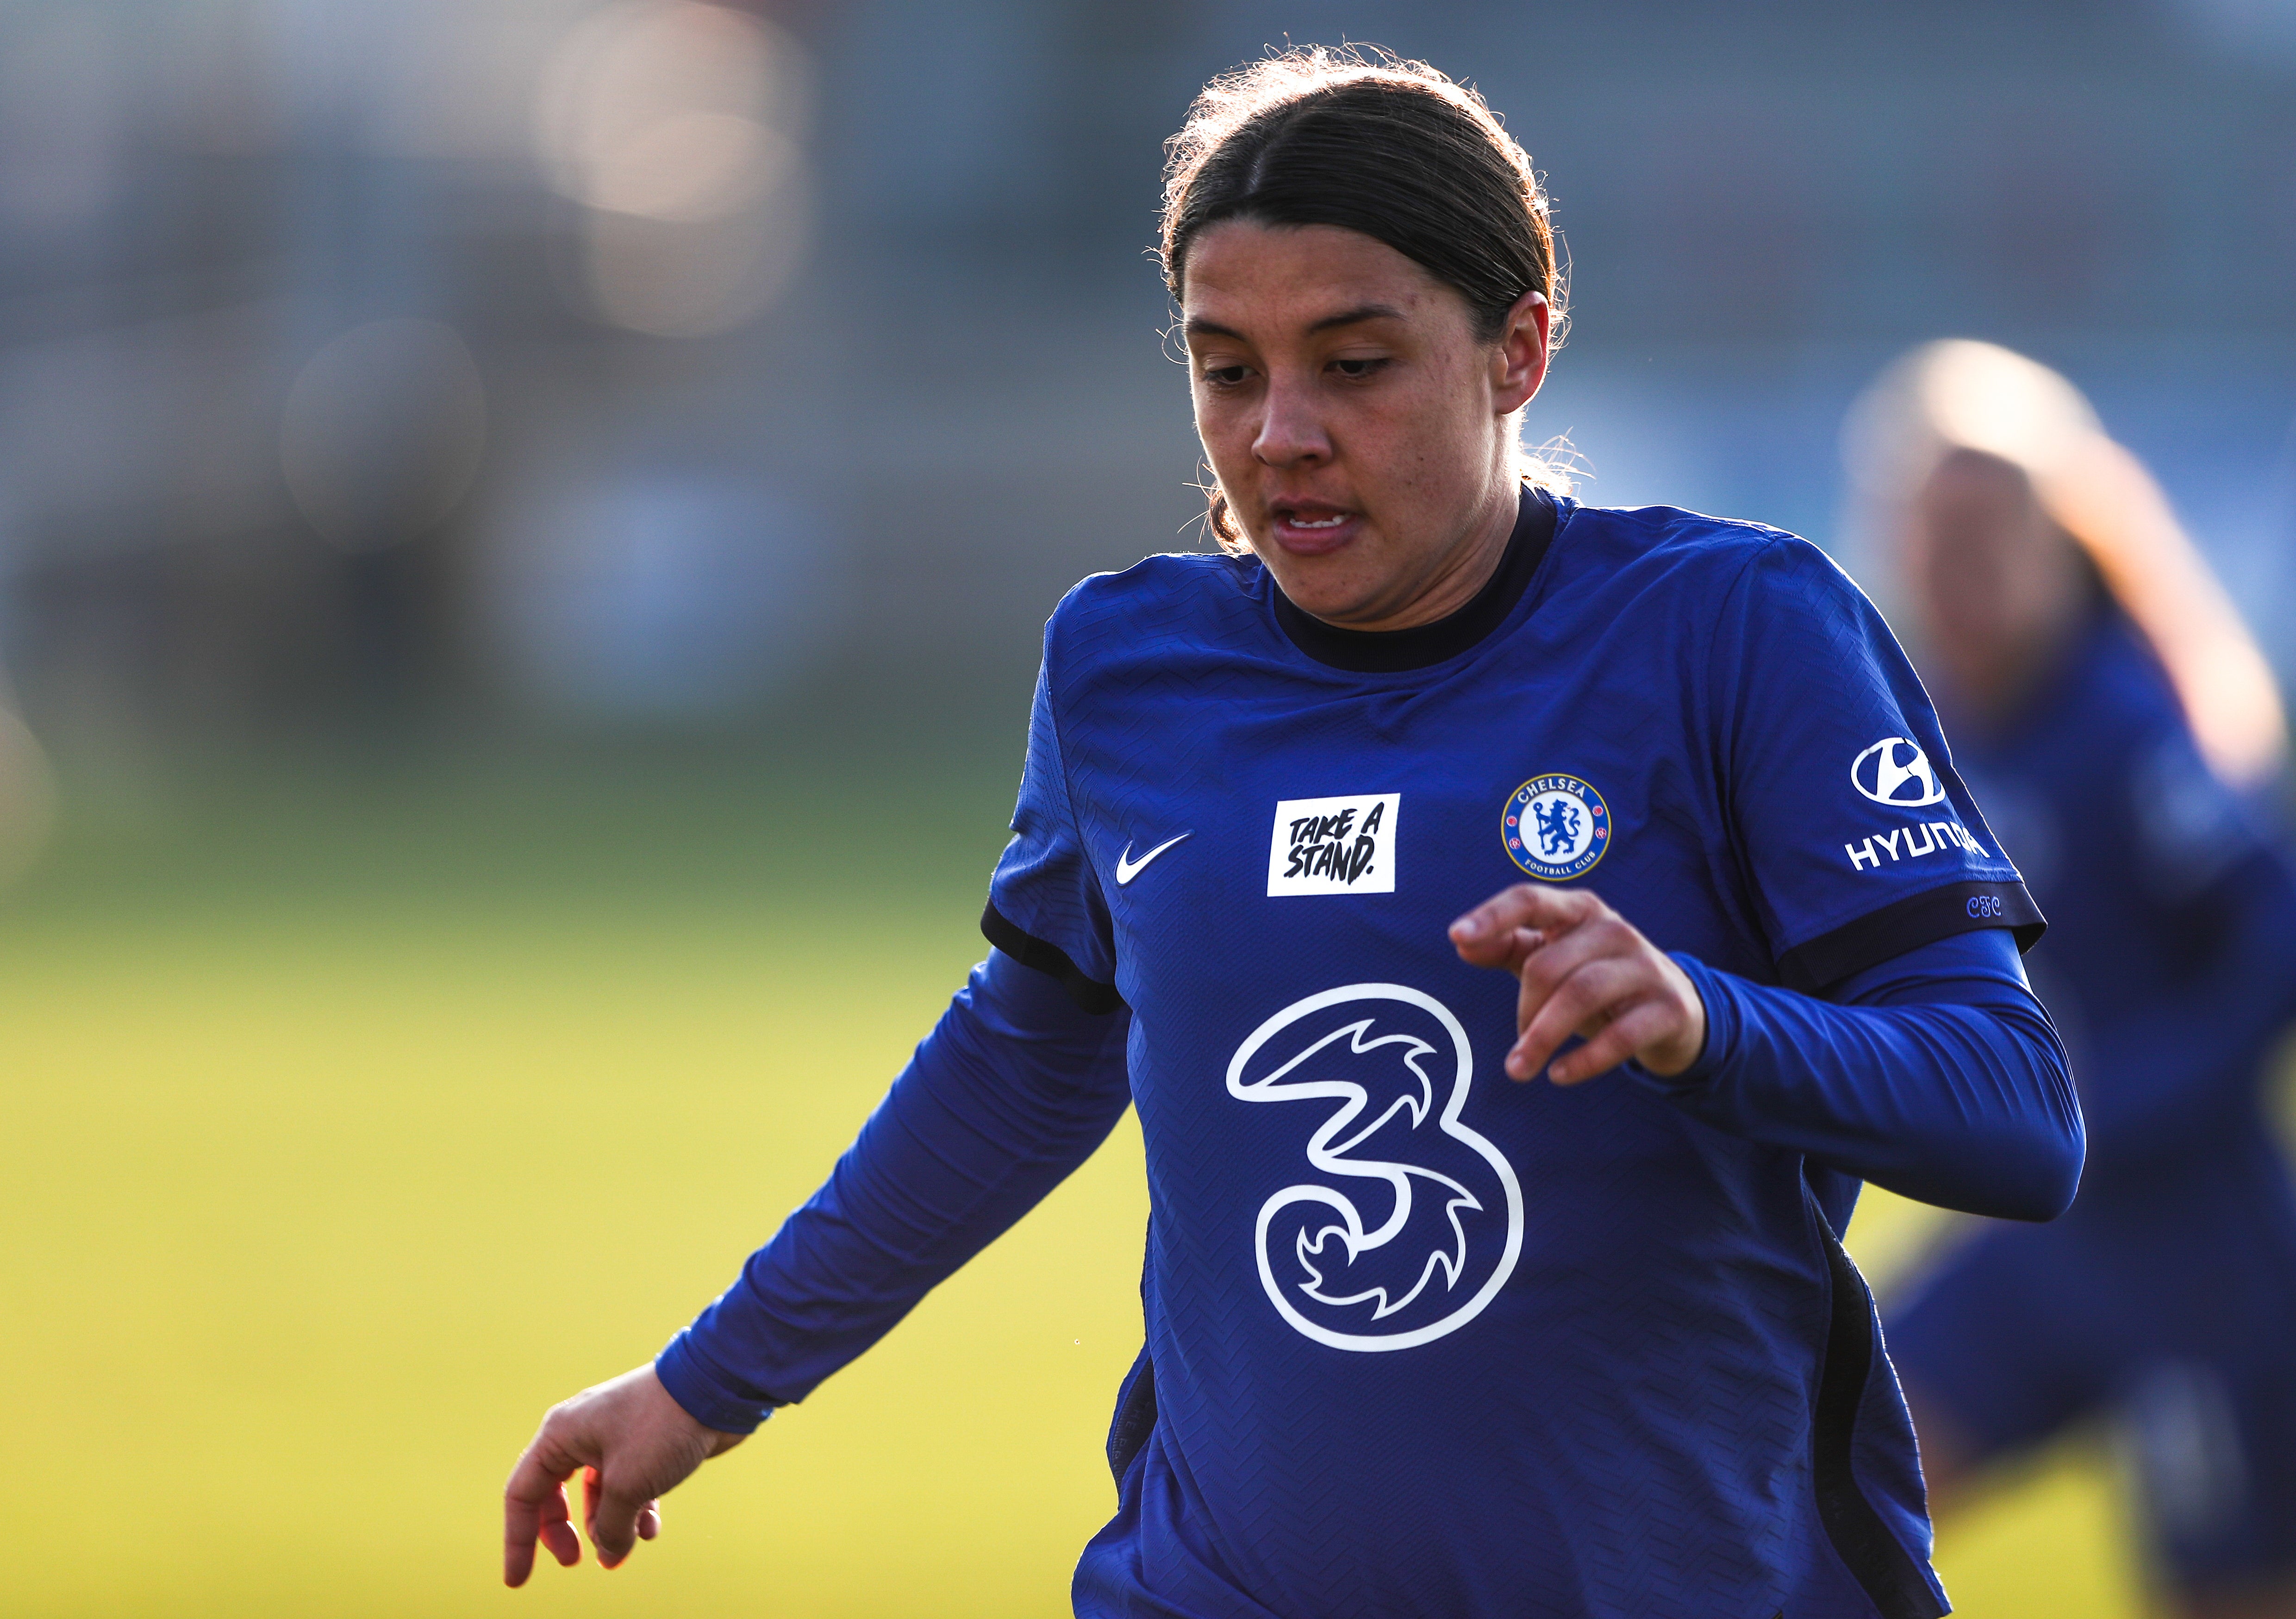 Chelsea's Sam Kerr was the WSL top scorer with 21 goals